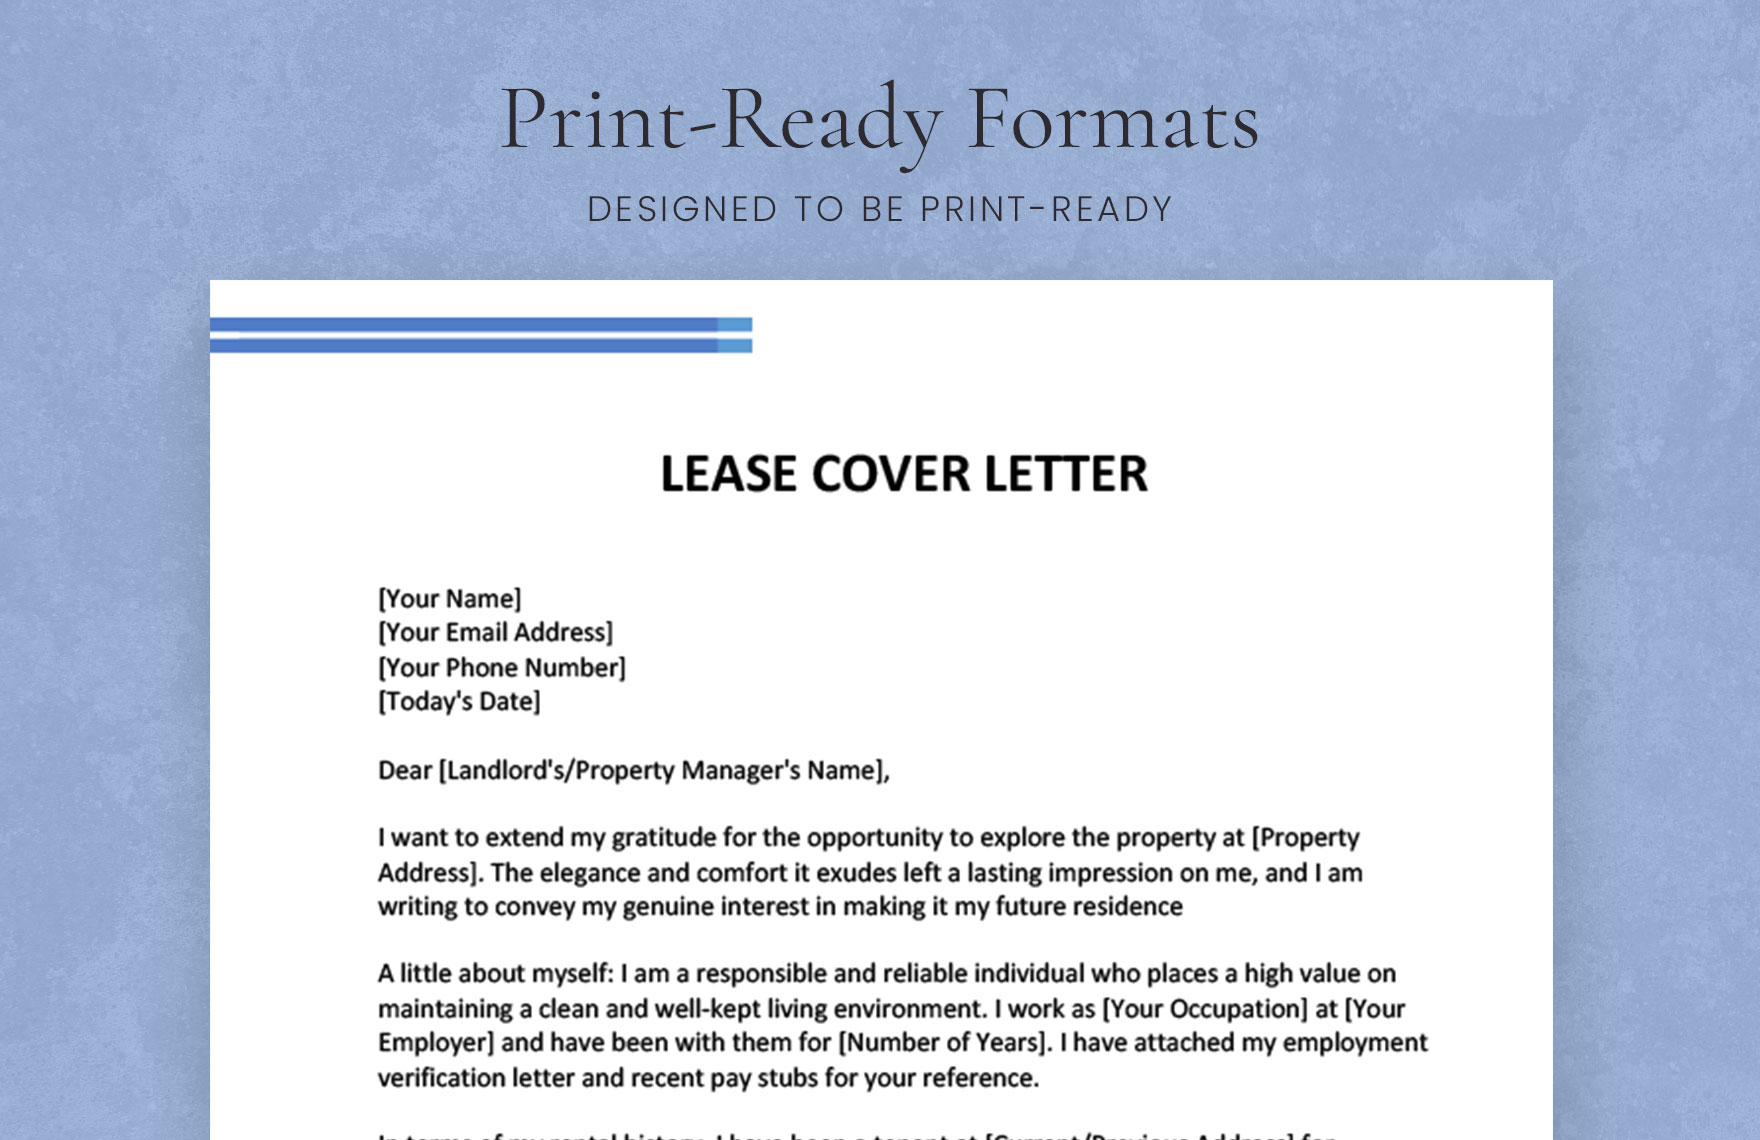 Lease Cover Letter